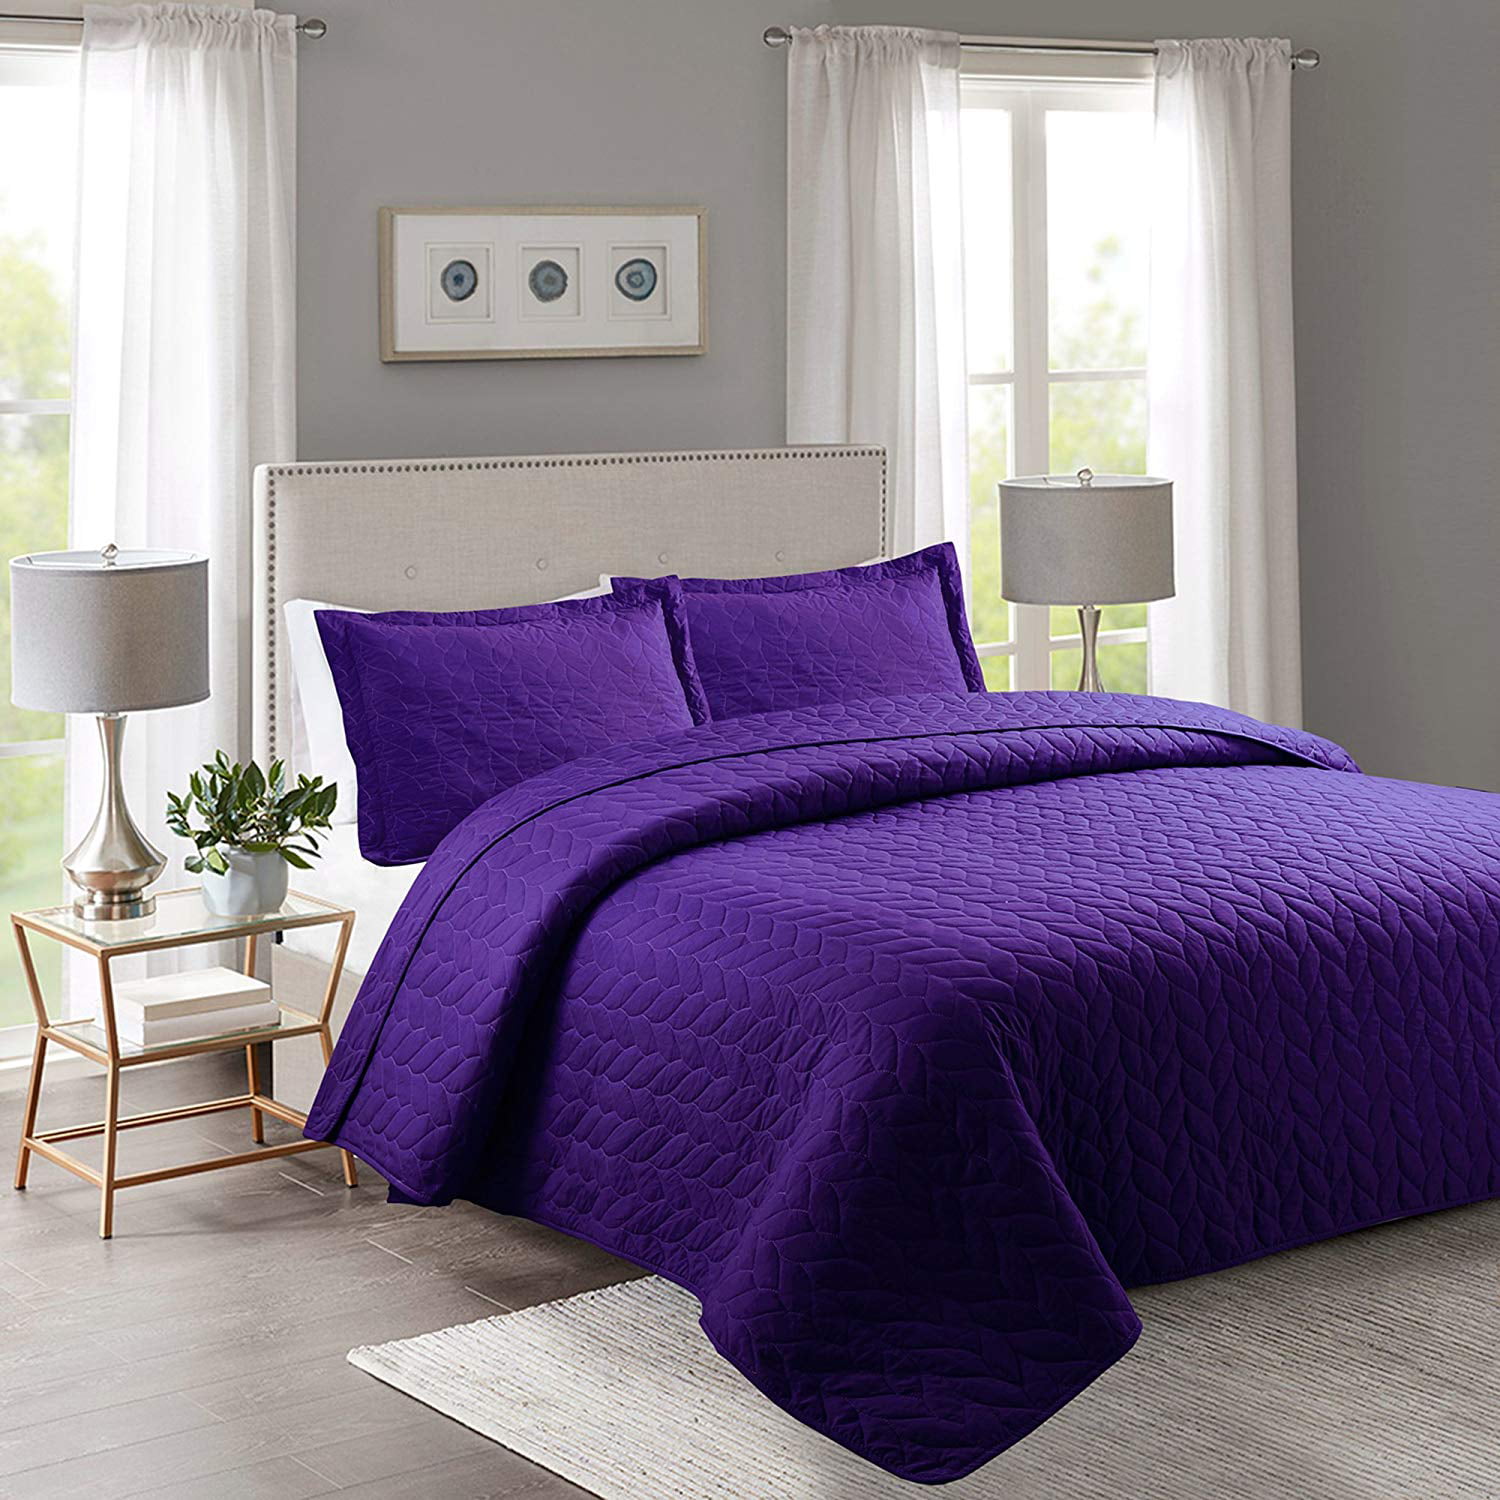 NENA PURPLE Solid Hypoallergenic Quilt Bedspread Bed Bedding Coverlets Cover